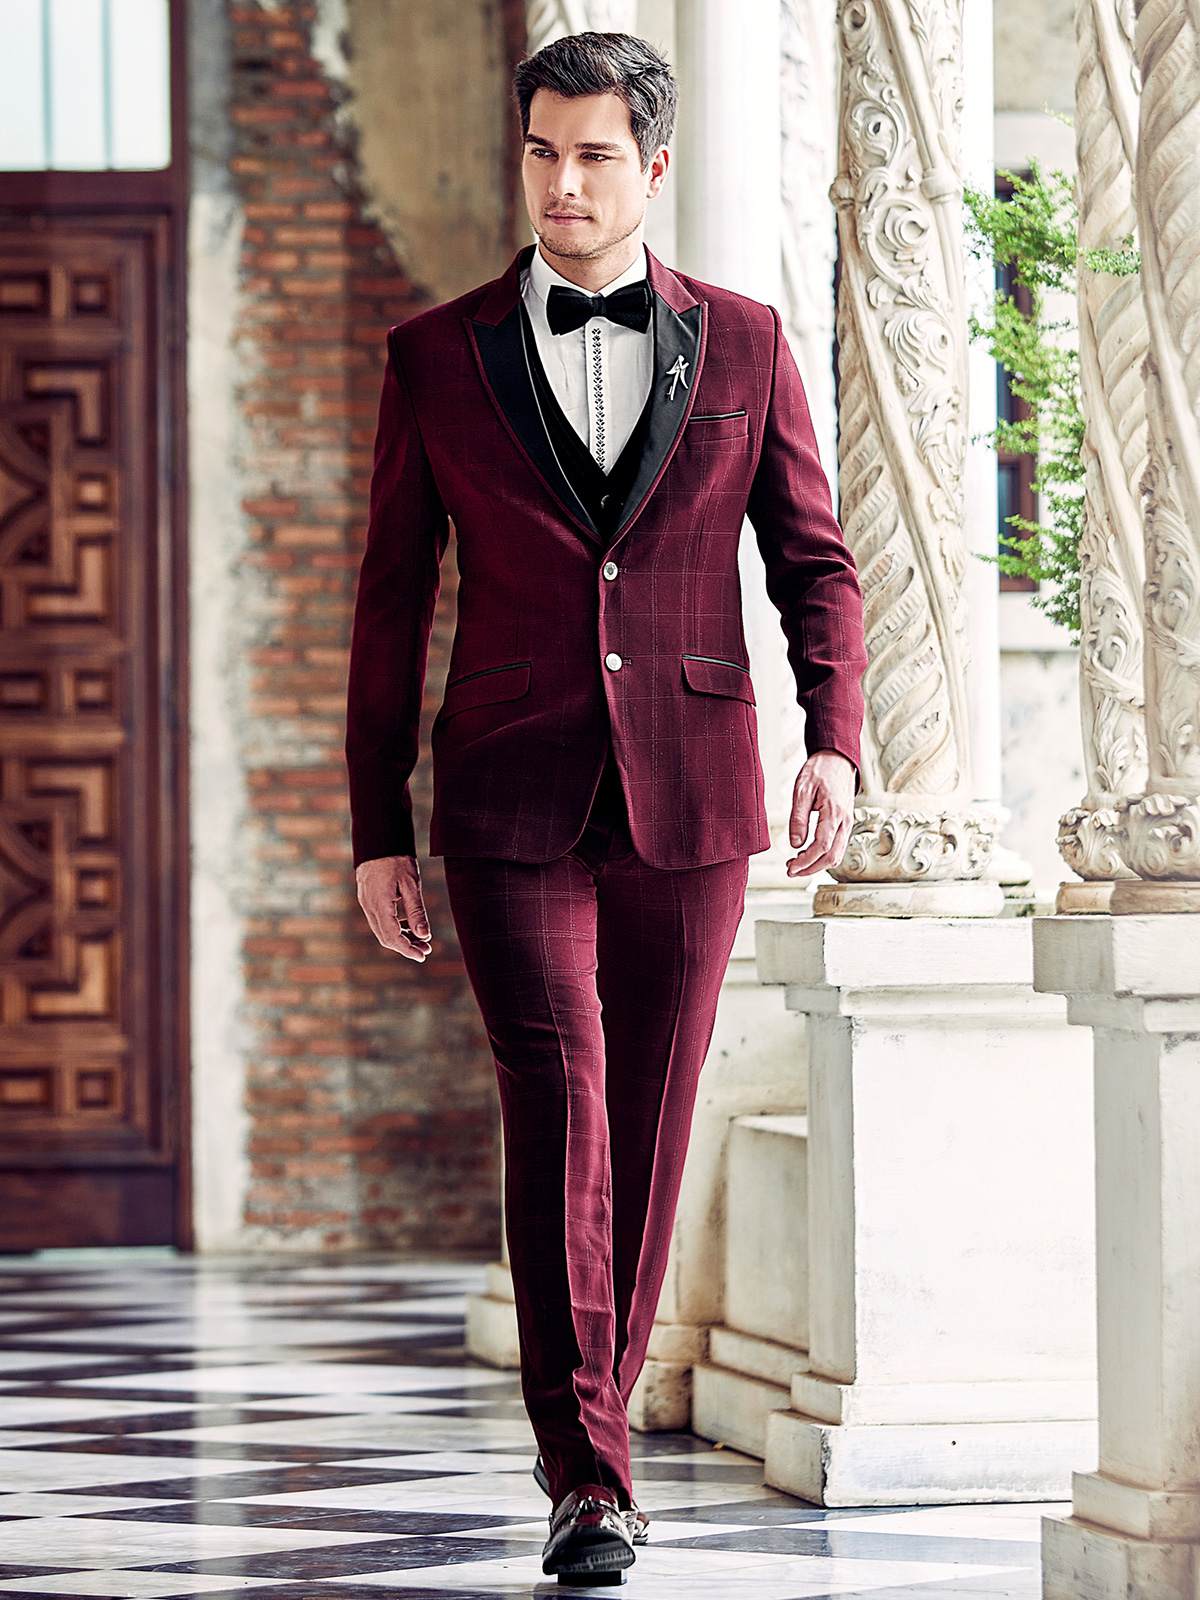 Latest Wedding suits for Groom, Wedding suits for Groom Images